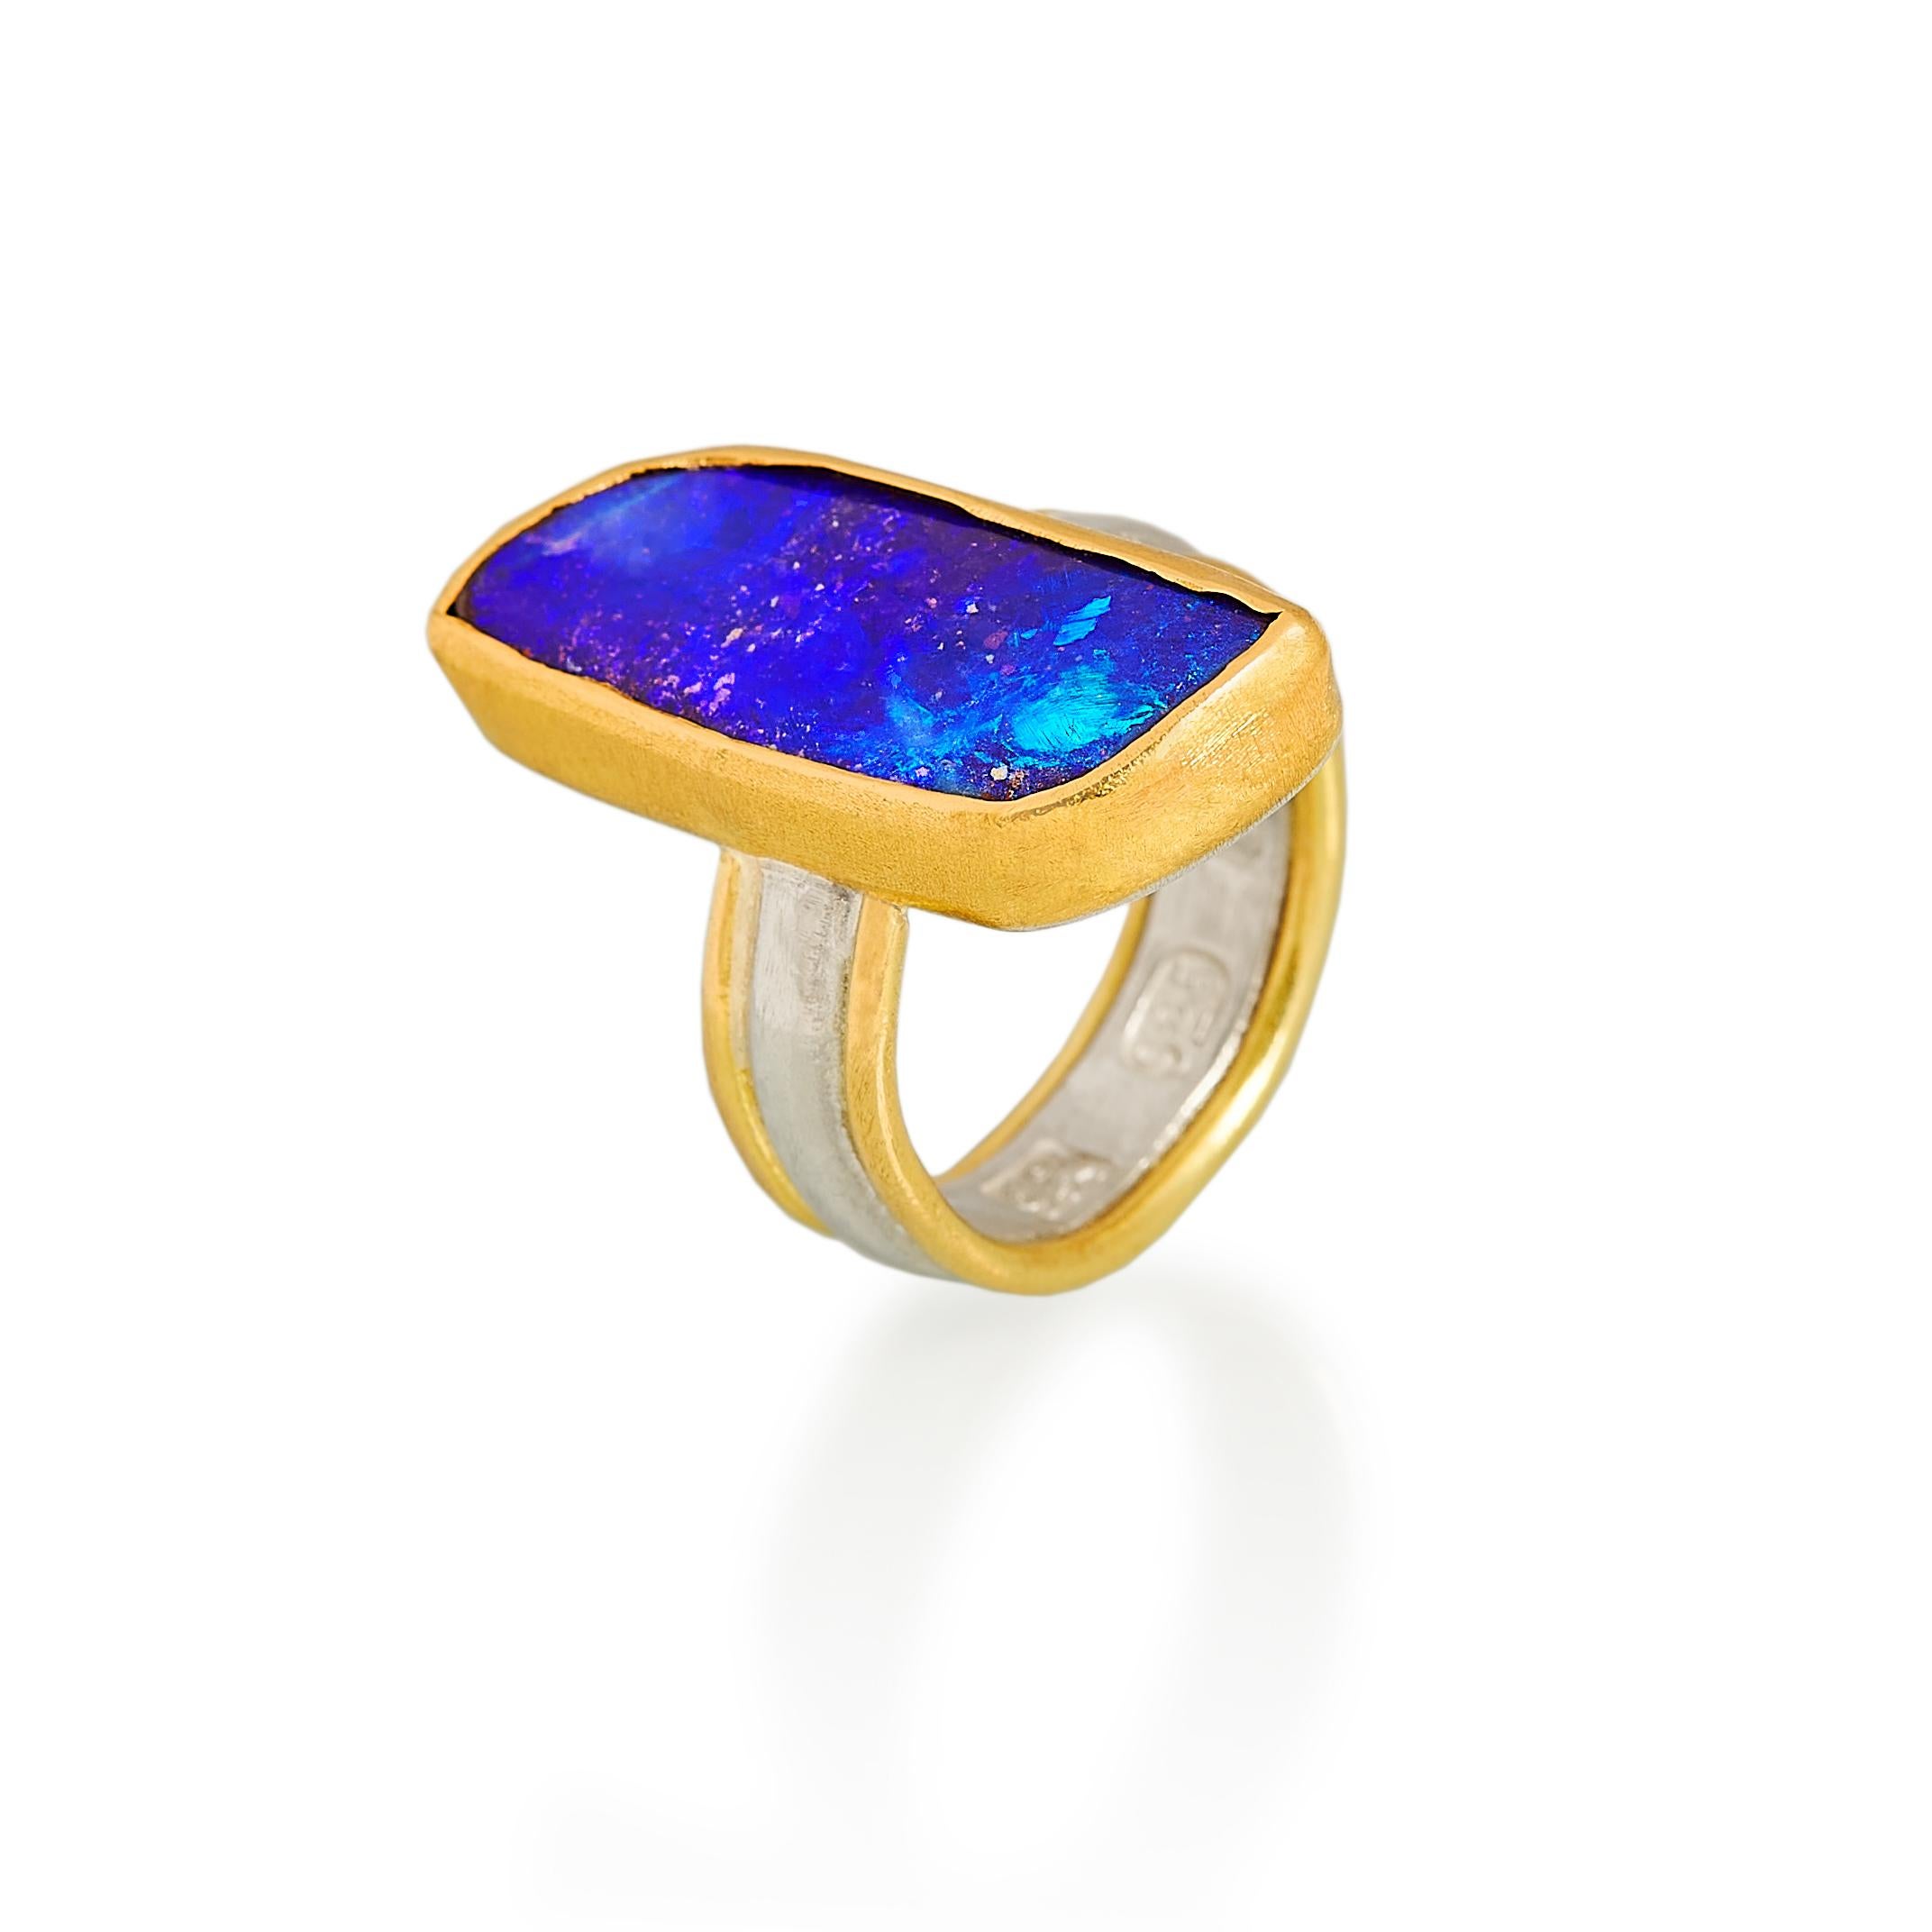 This vivid deep blue boulder opal is complimented in a 22 karat textured yellow gold setting. The shank is silver with 18 karat gold and it has large distinct British hallmarks. 

U.S ring size: 7¾
U.K size: P

Please don't hesitate to contact us if